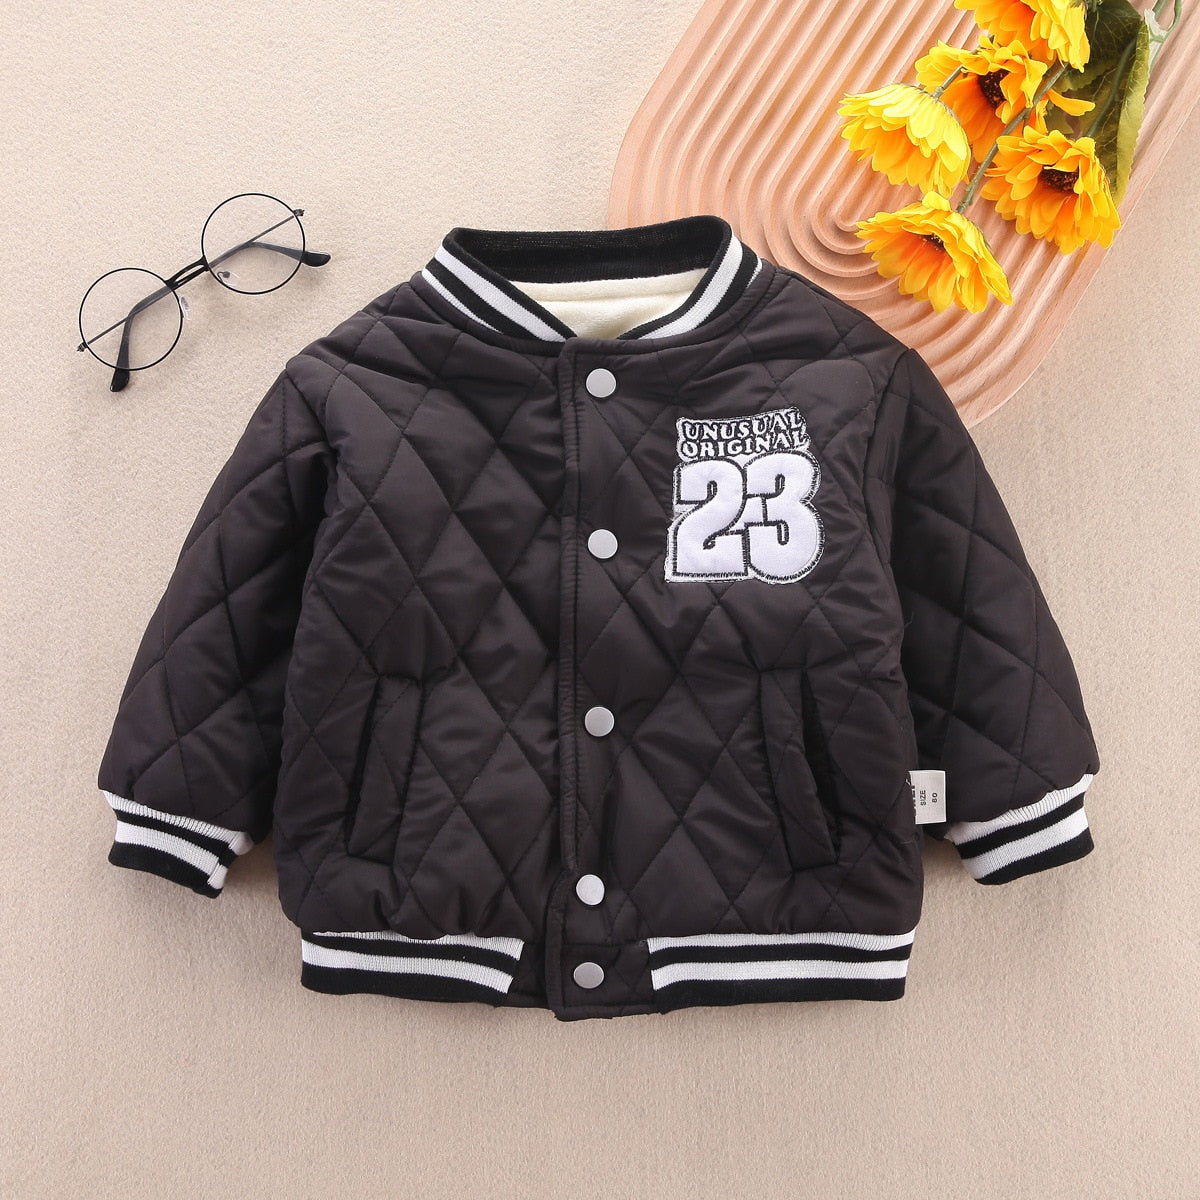 Warm Thick Baseball Jacket for Little Boys and Girls - Black, White, Beige